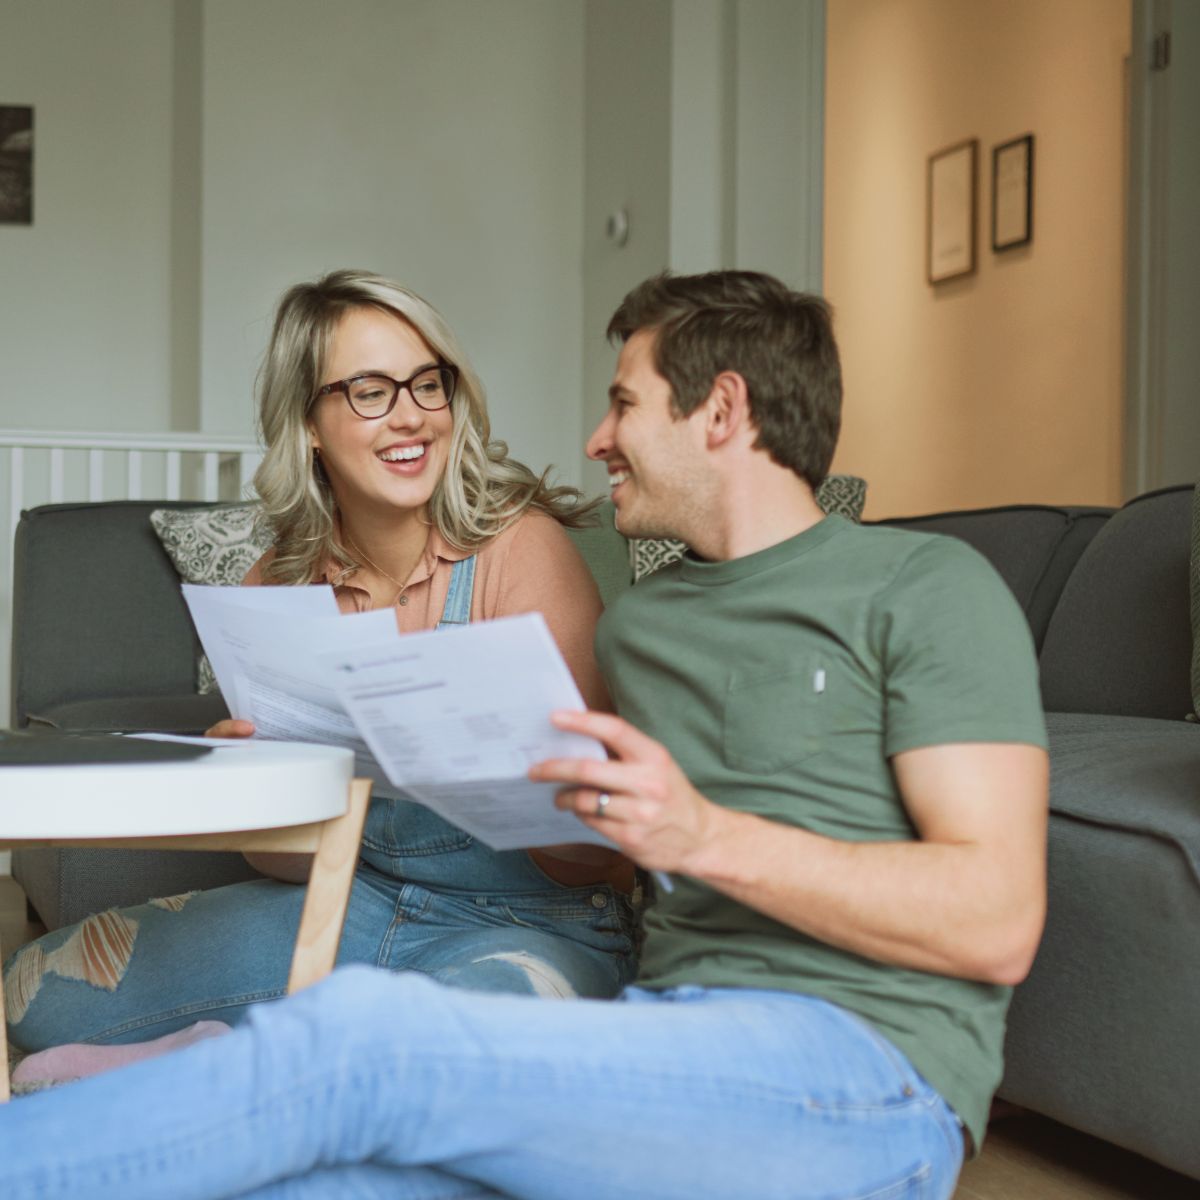 How To Get Your Spouse on the Same Financial Page